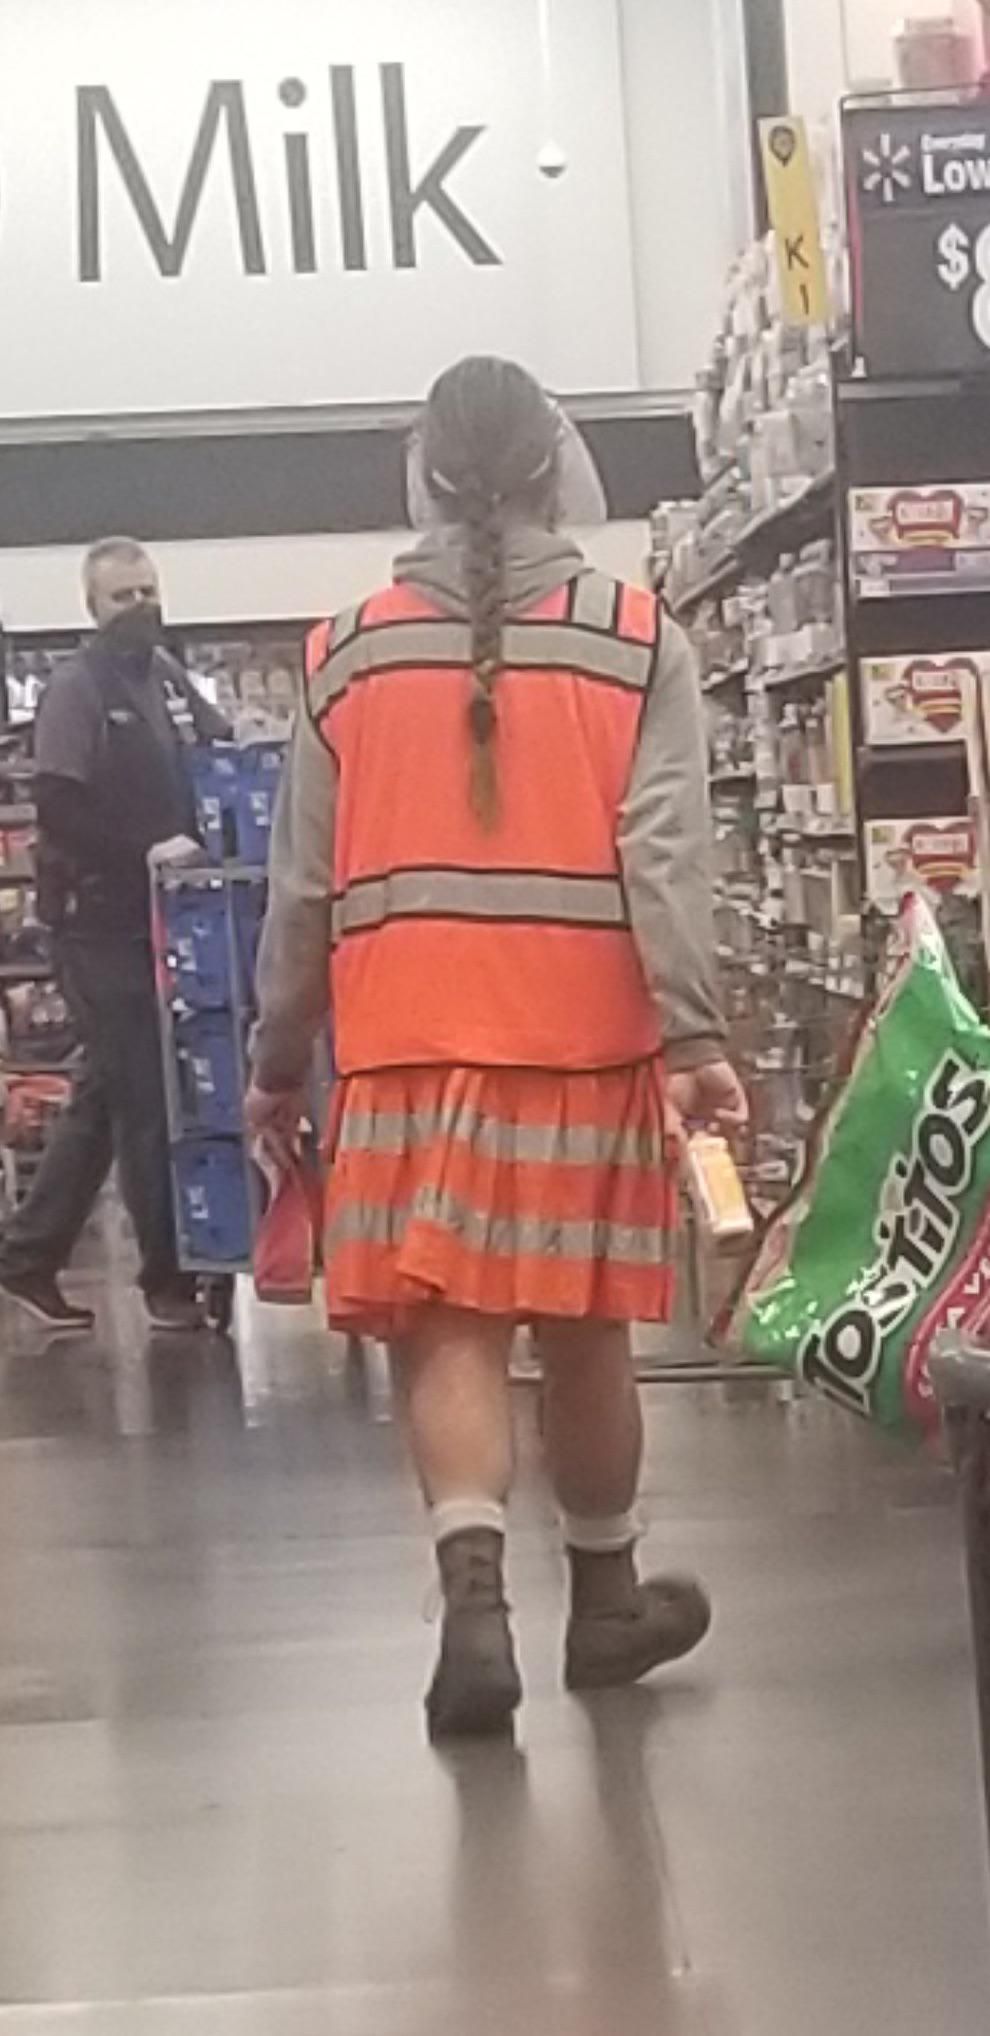 Used to work here, this guy is a cart pusher. He always wore kilts, and then today I seen this. Safety kilt.